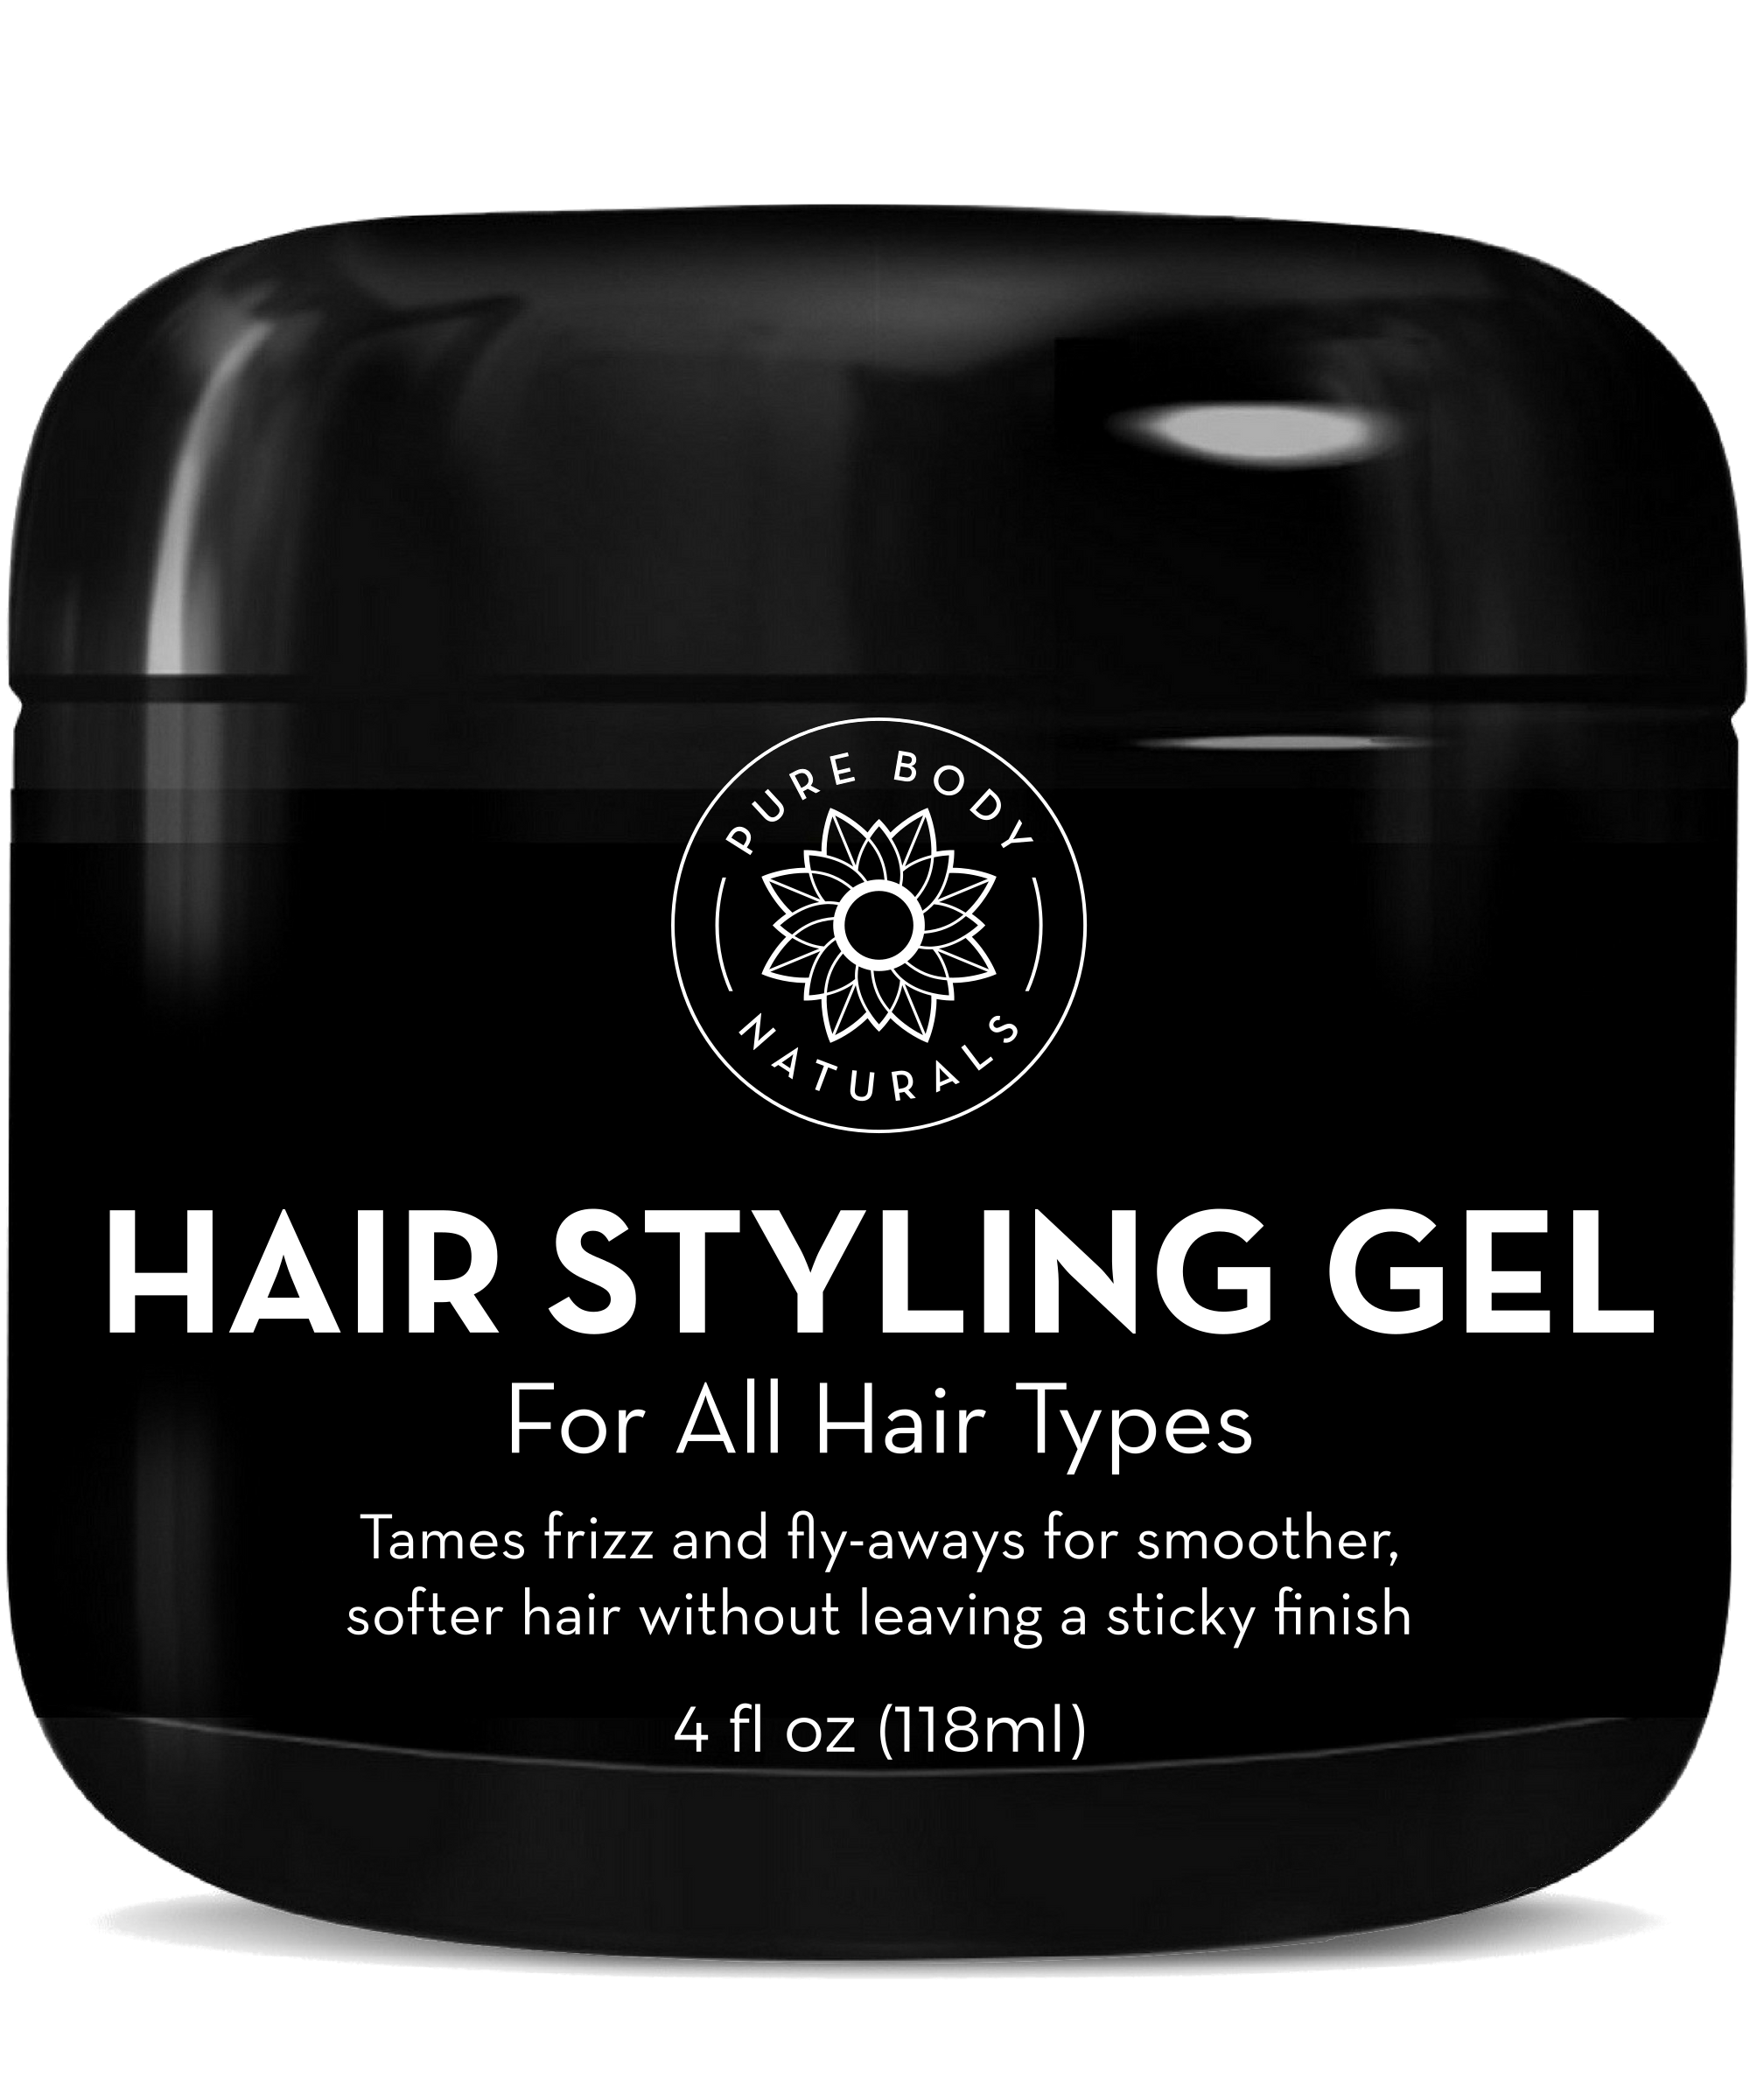 Pure Body Naturals Hair Styling Gel for Men, 4 Ounces eBay